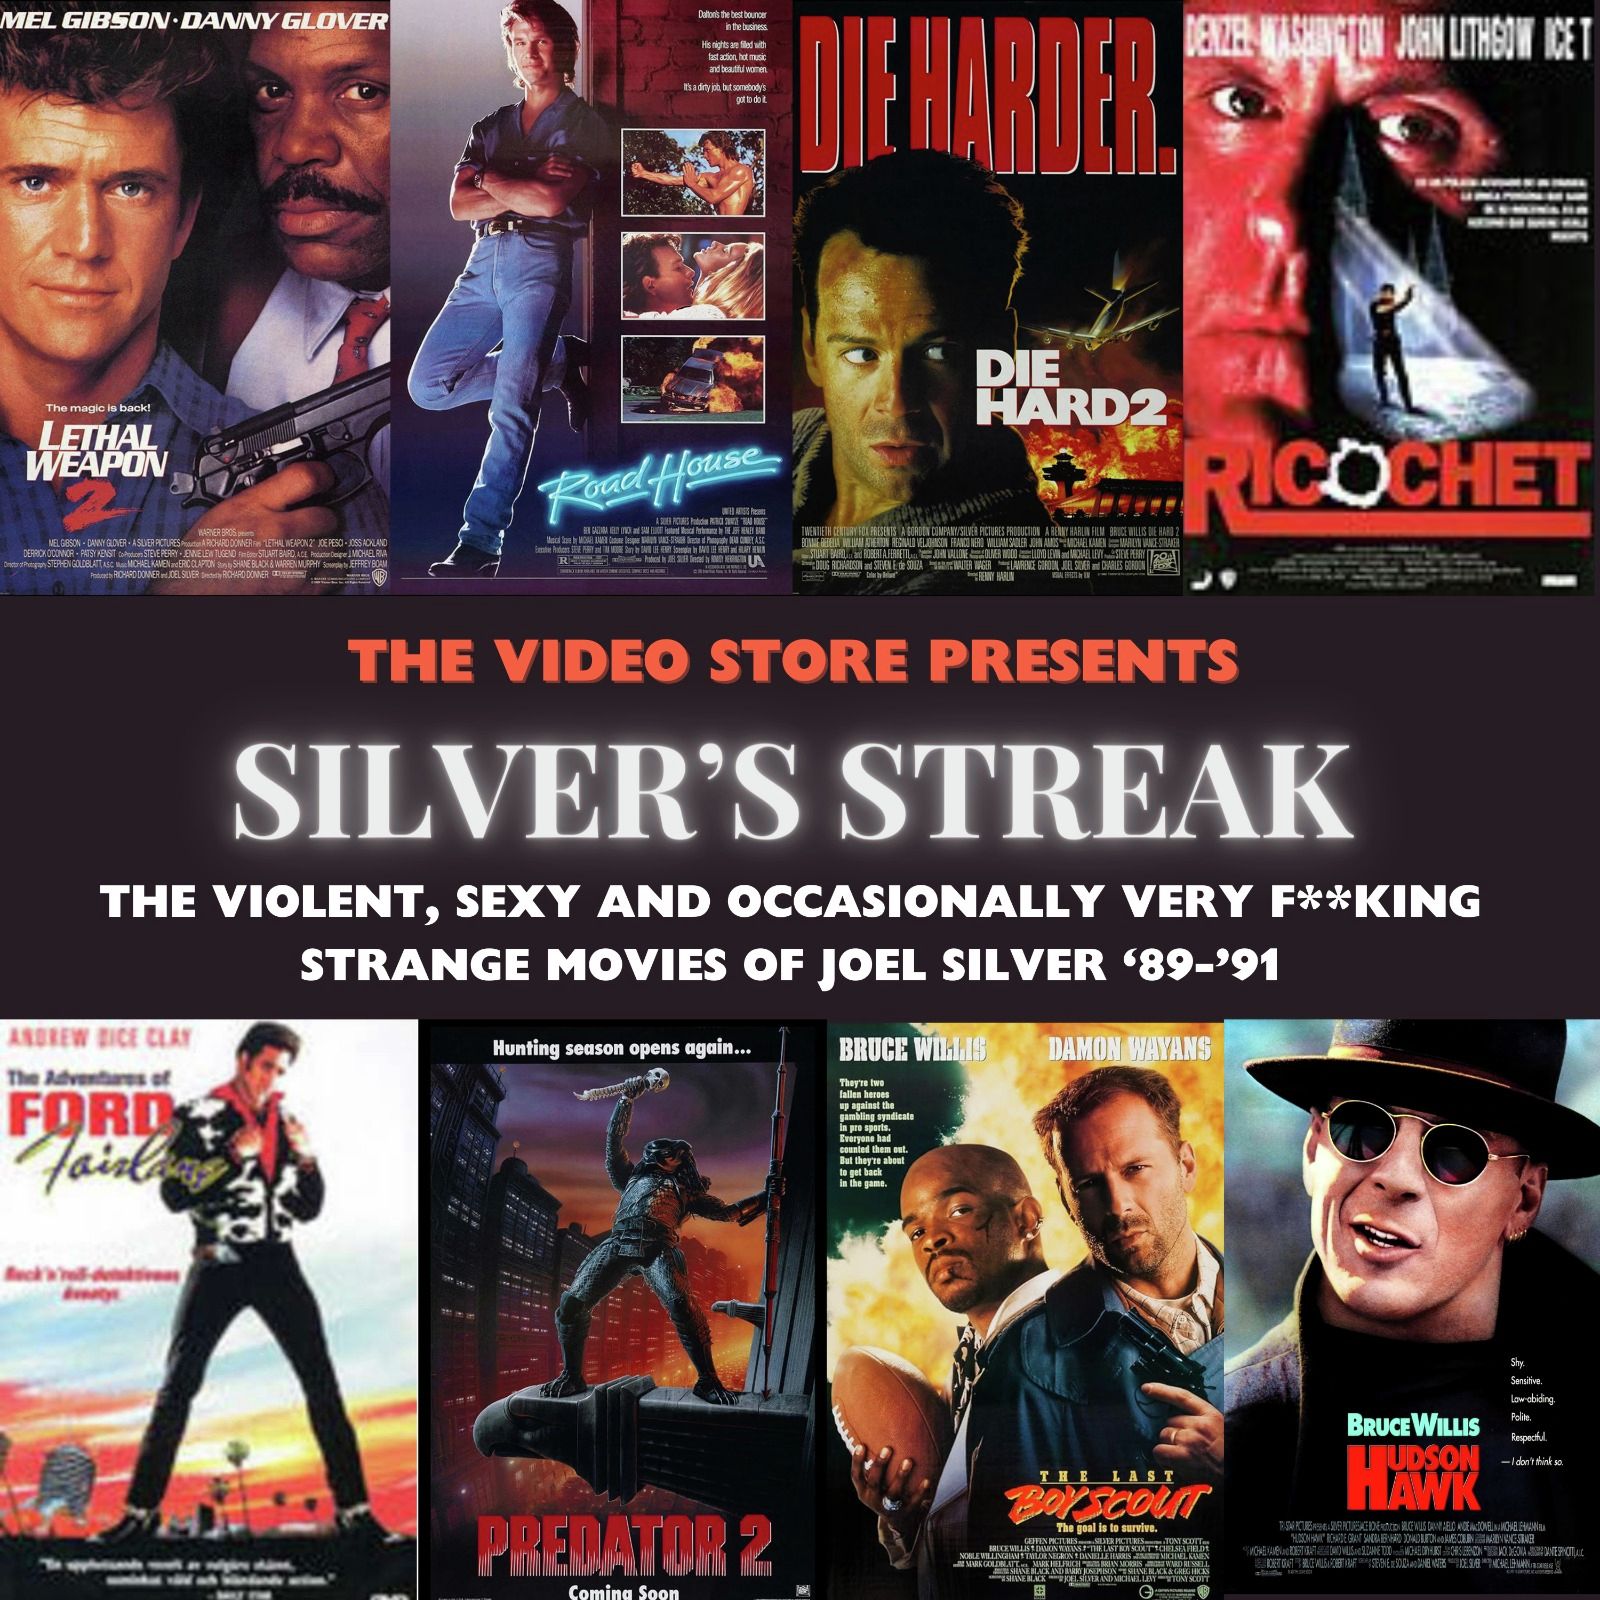 The Video Store Presents: Silver's Streak Vol. 2 -  The Adventures of Ford Fairlaine & Die Hard 2